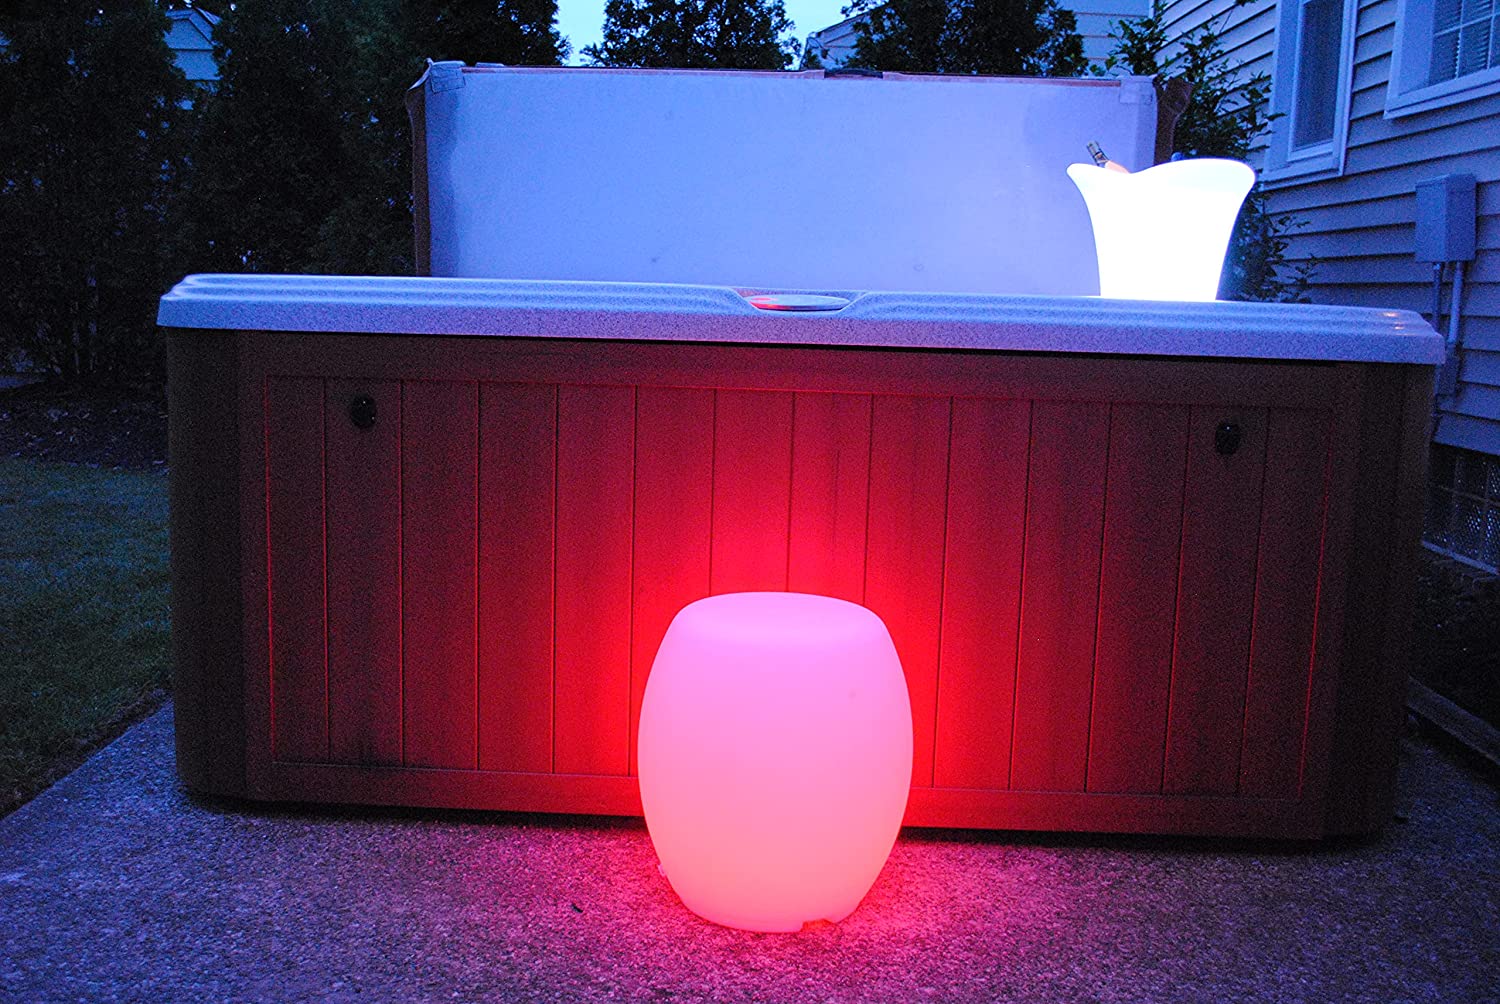 MACAU- LED Illuminated Barrel Stool with 16 color options and 4 color changing modes on the remote. Portable, waterproof, and requires no batteries. Charge lasts approximately 8 hours.